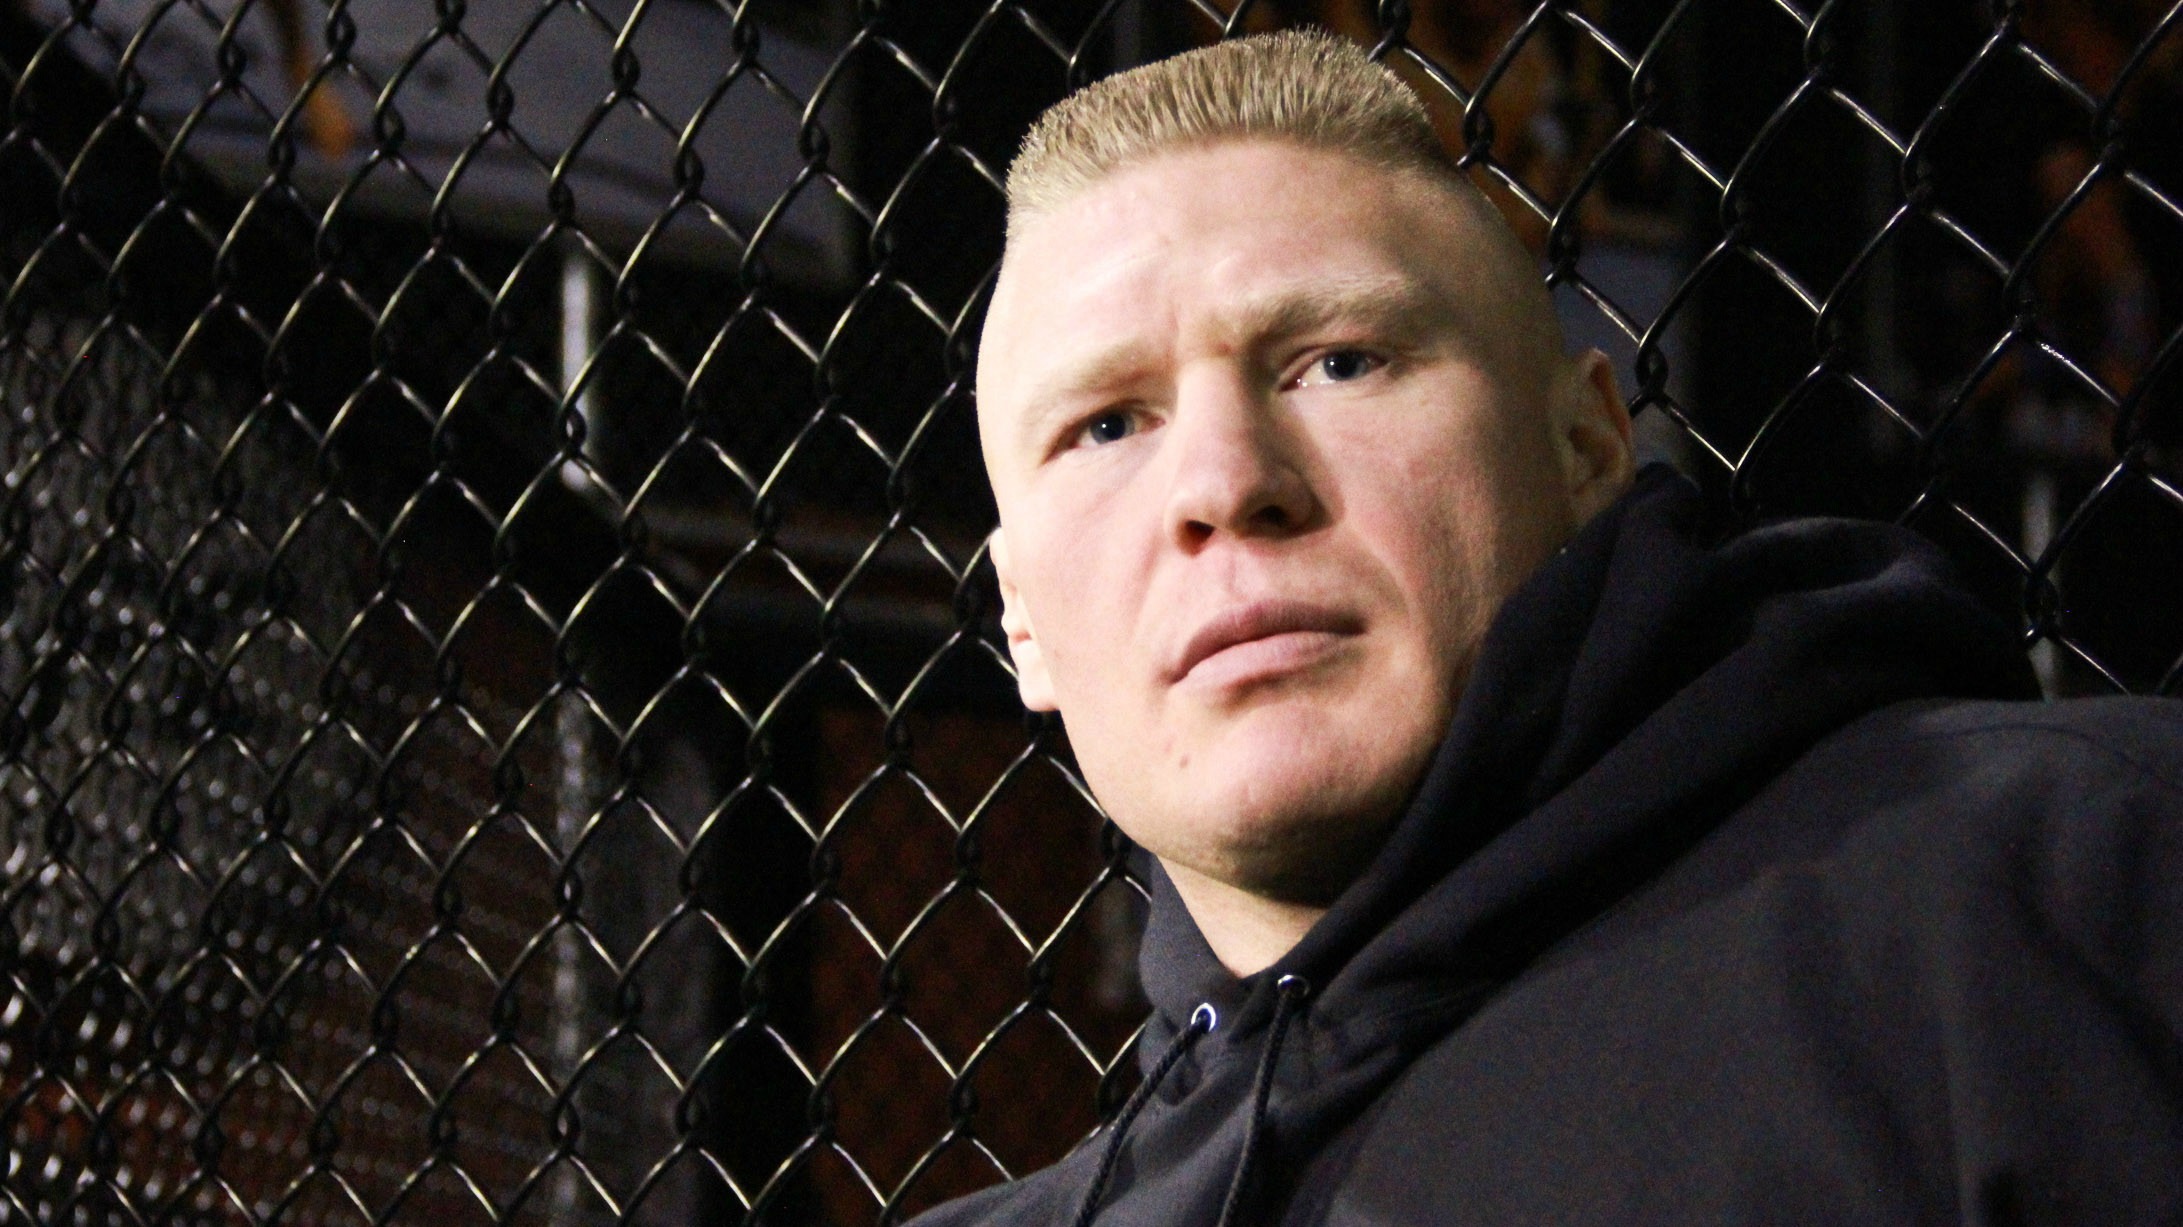 Wwe Fighter Brock Lesnar Noramal Photo Daily Pics Update HD